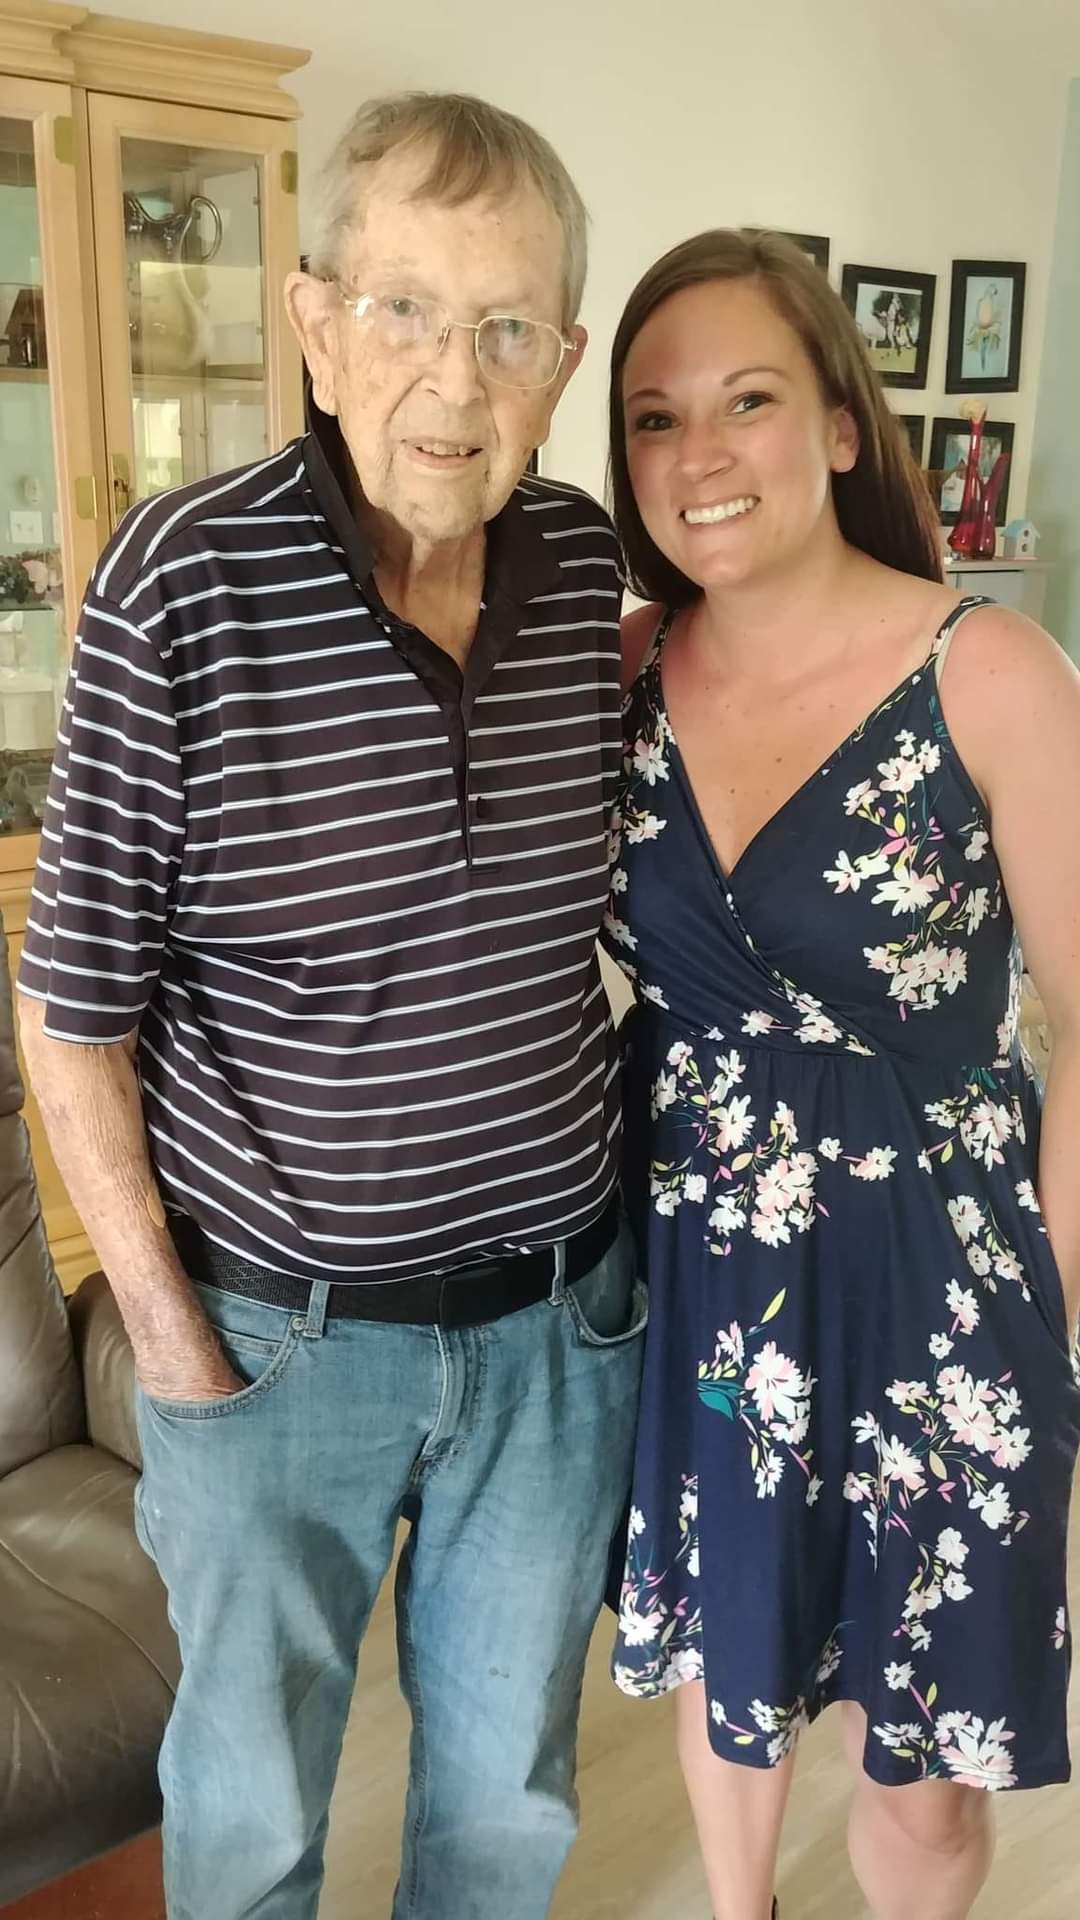 My last picture with my grandpa